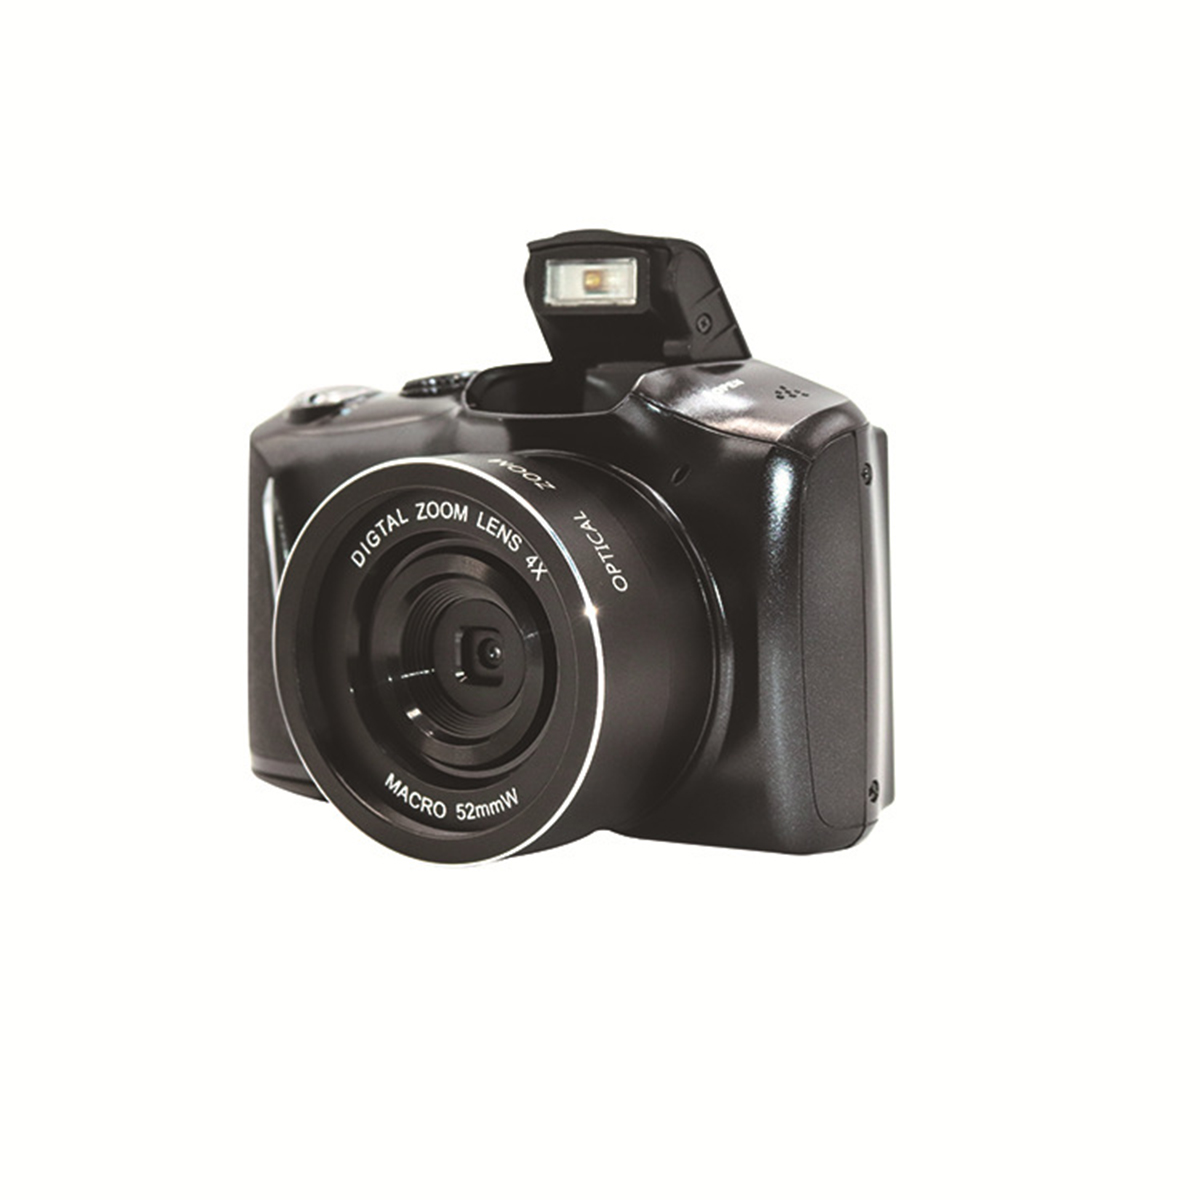 Find AMKOV CD R6S 2 7K 48MP Mirrorless Camera Digital Camcorder 4X ZOOM Video Camera for Sale on Gipsybee.com with cryptocurrencies